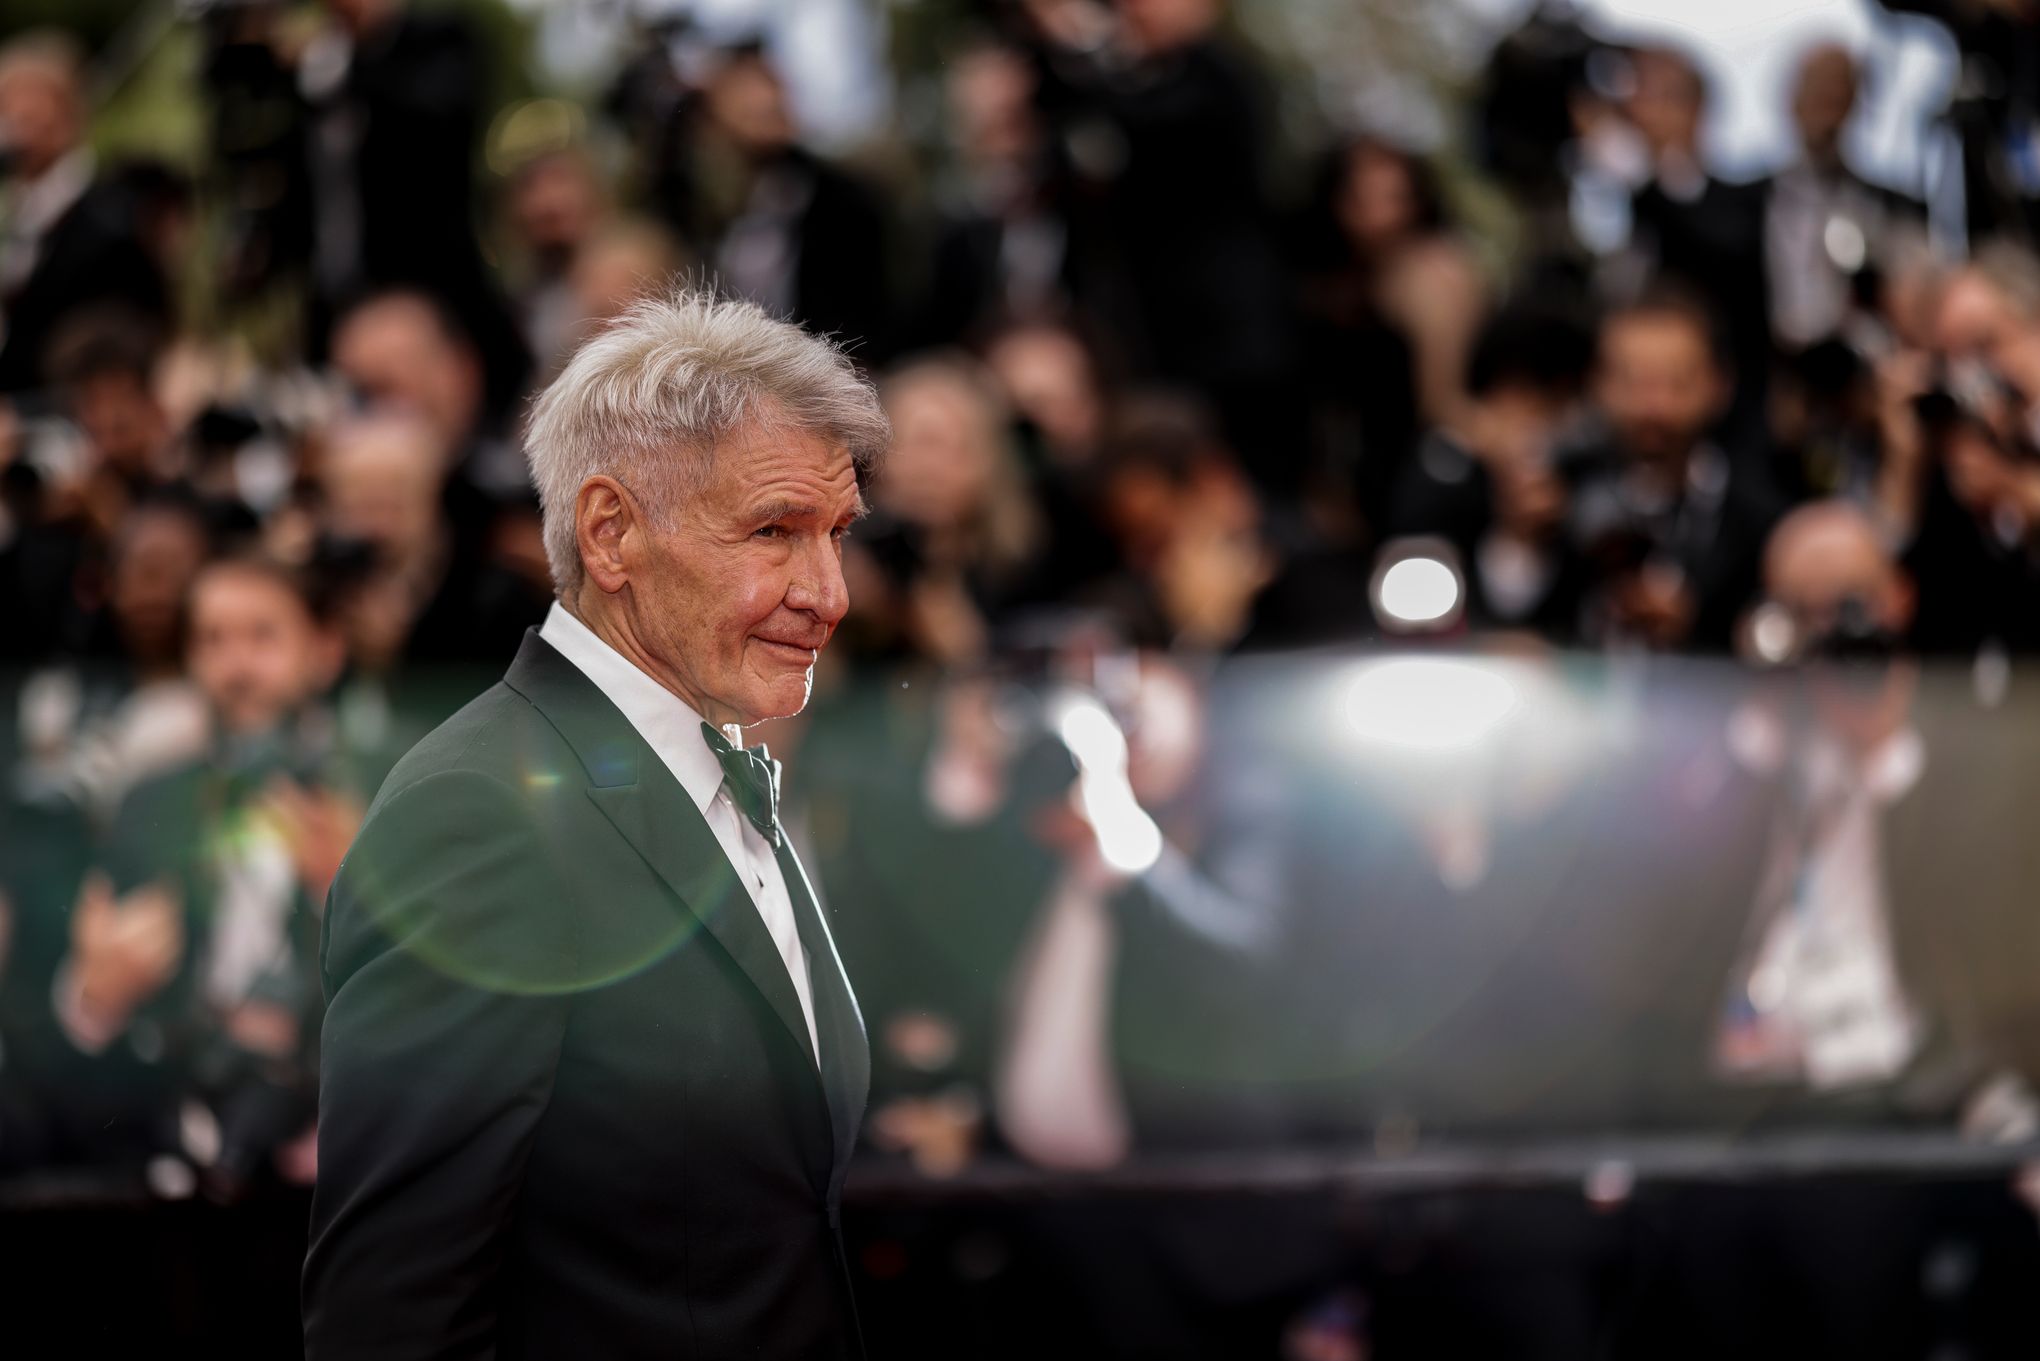 Harrison Ford returns with Indiana Jones and the Dial of Destiny - Festival  de Cannes